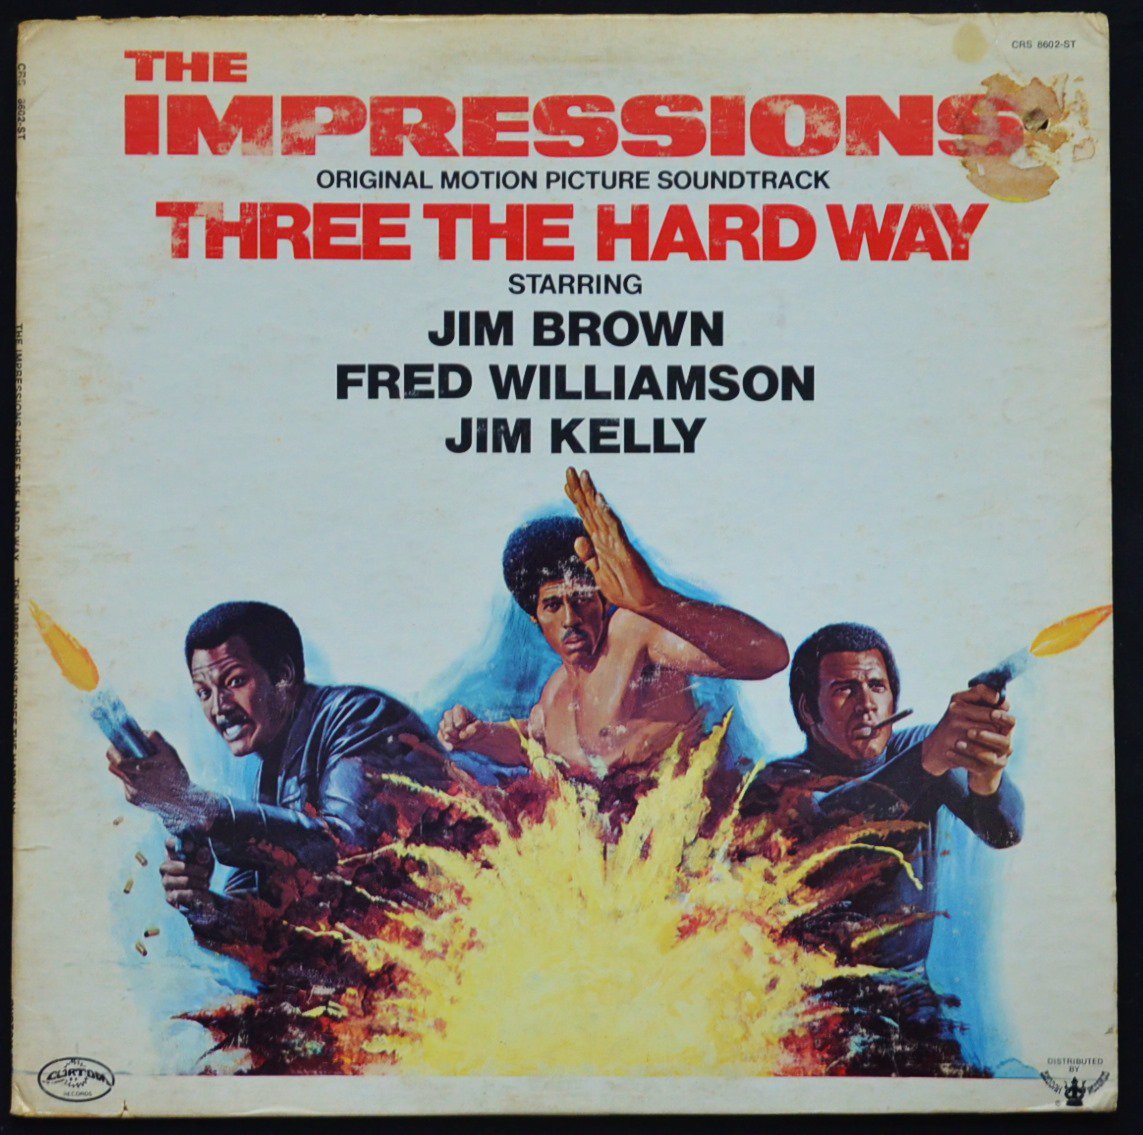 THE IMPRESSIONS / THREE THE HARD WAY (ORIGINAL MOTION PICTURE SOUNDTRACK) (LP)